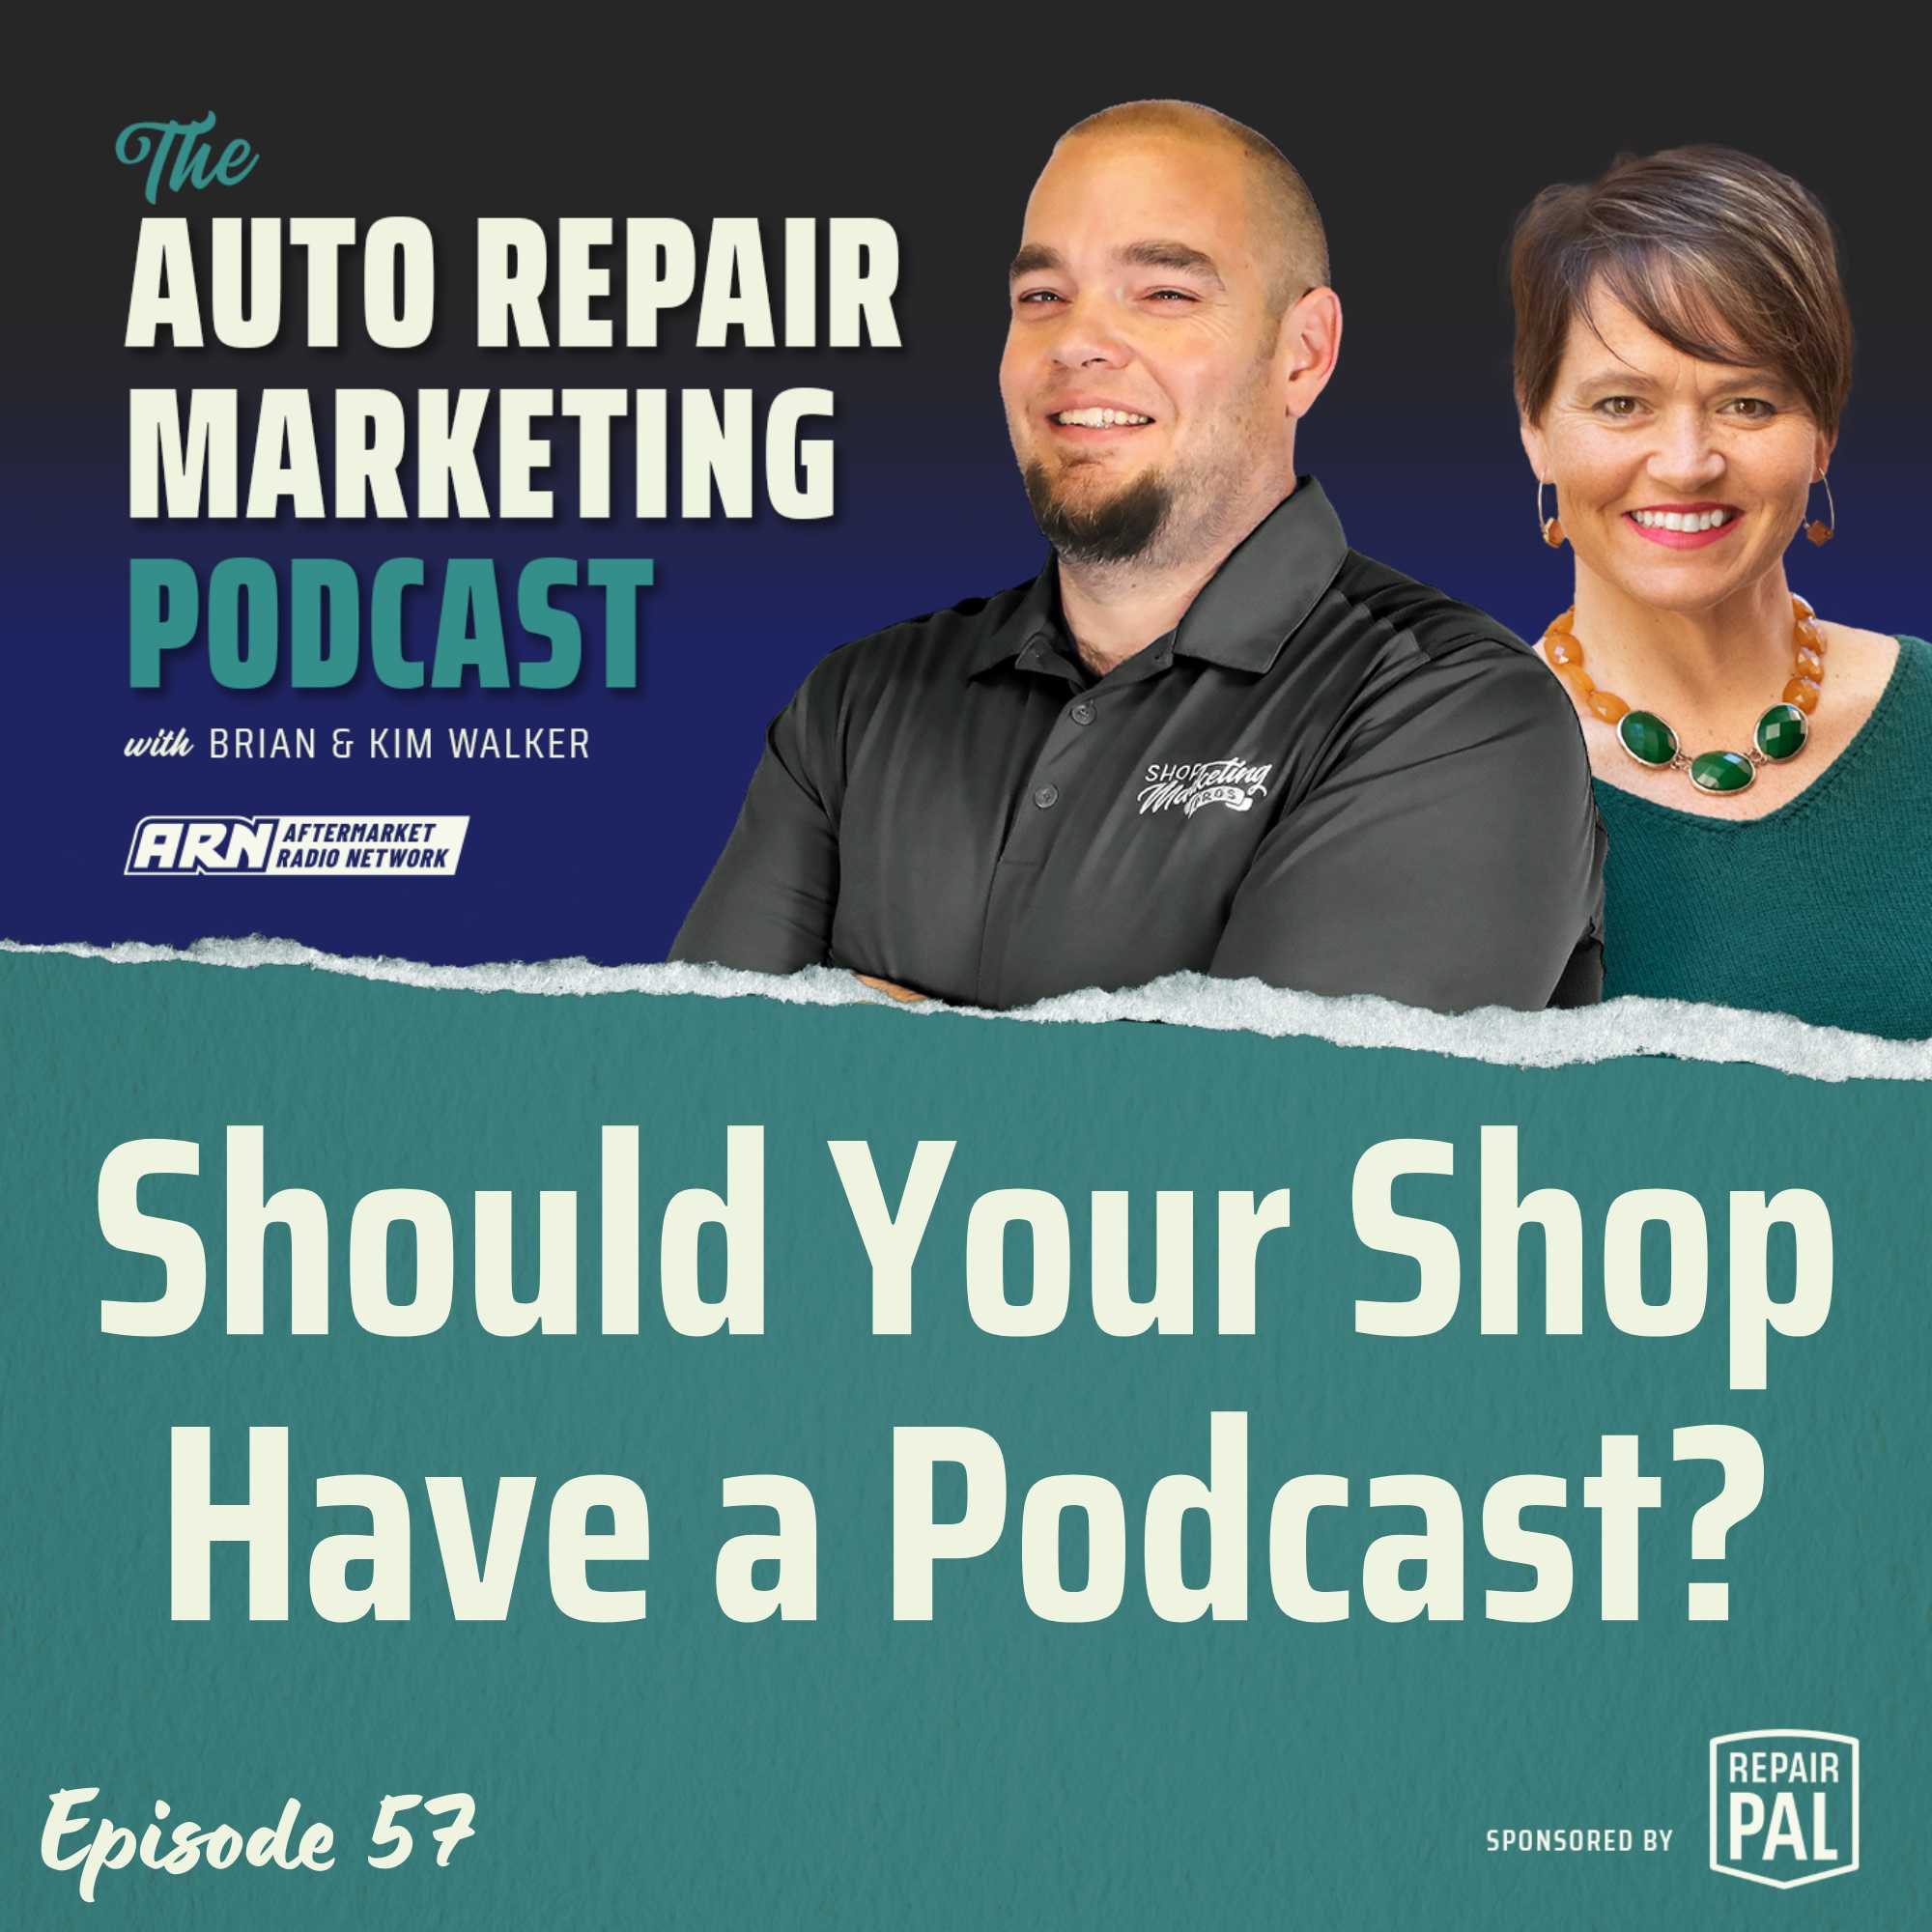 The Auto Repair Marketing Podcast Episode 57. Brian & Kim Walker talking about the topic "Should Your Shop Have a Podcast?". Sponsored by Repair Pal.